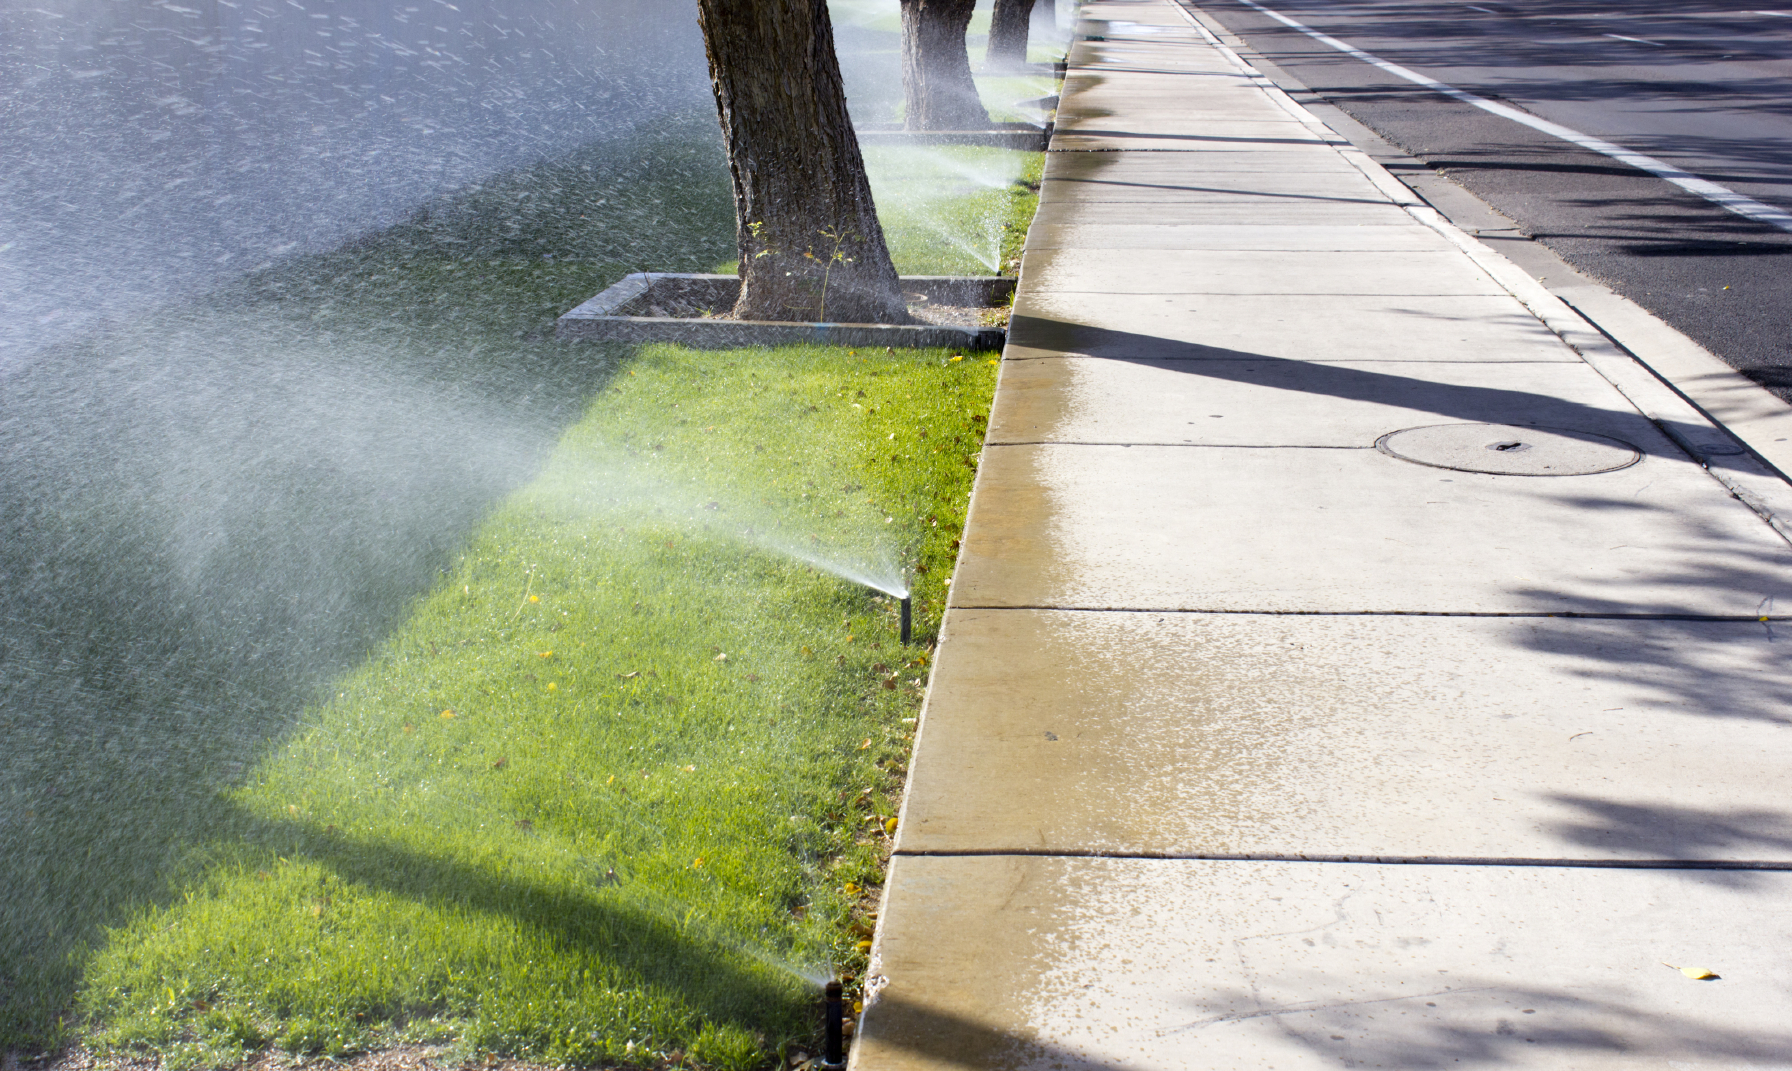 Water officials say people often forget to turn off lawn sprinklers when it starts raining. (iStock/Getty Images)